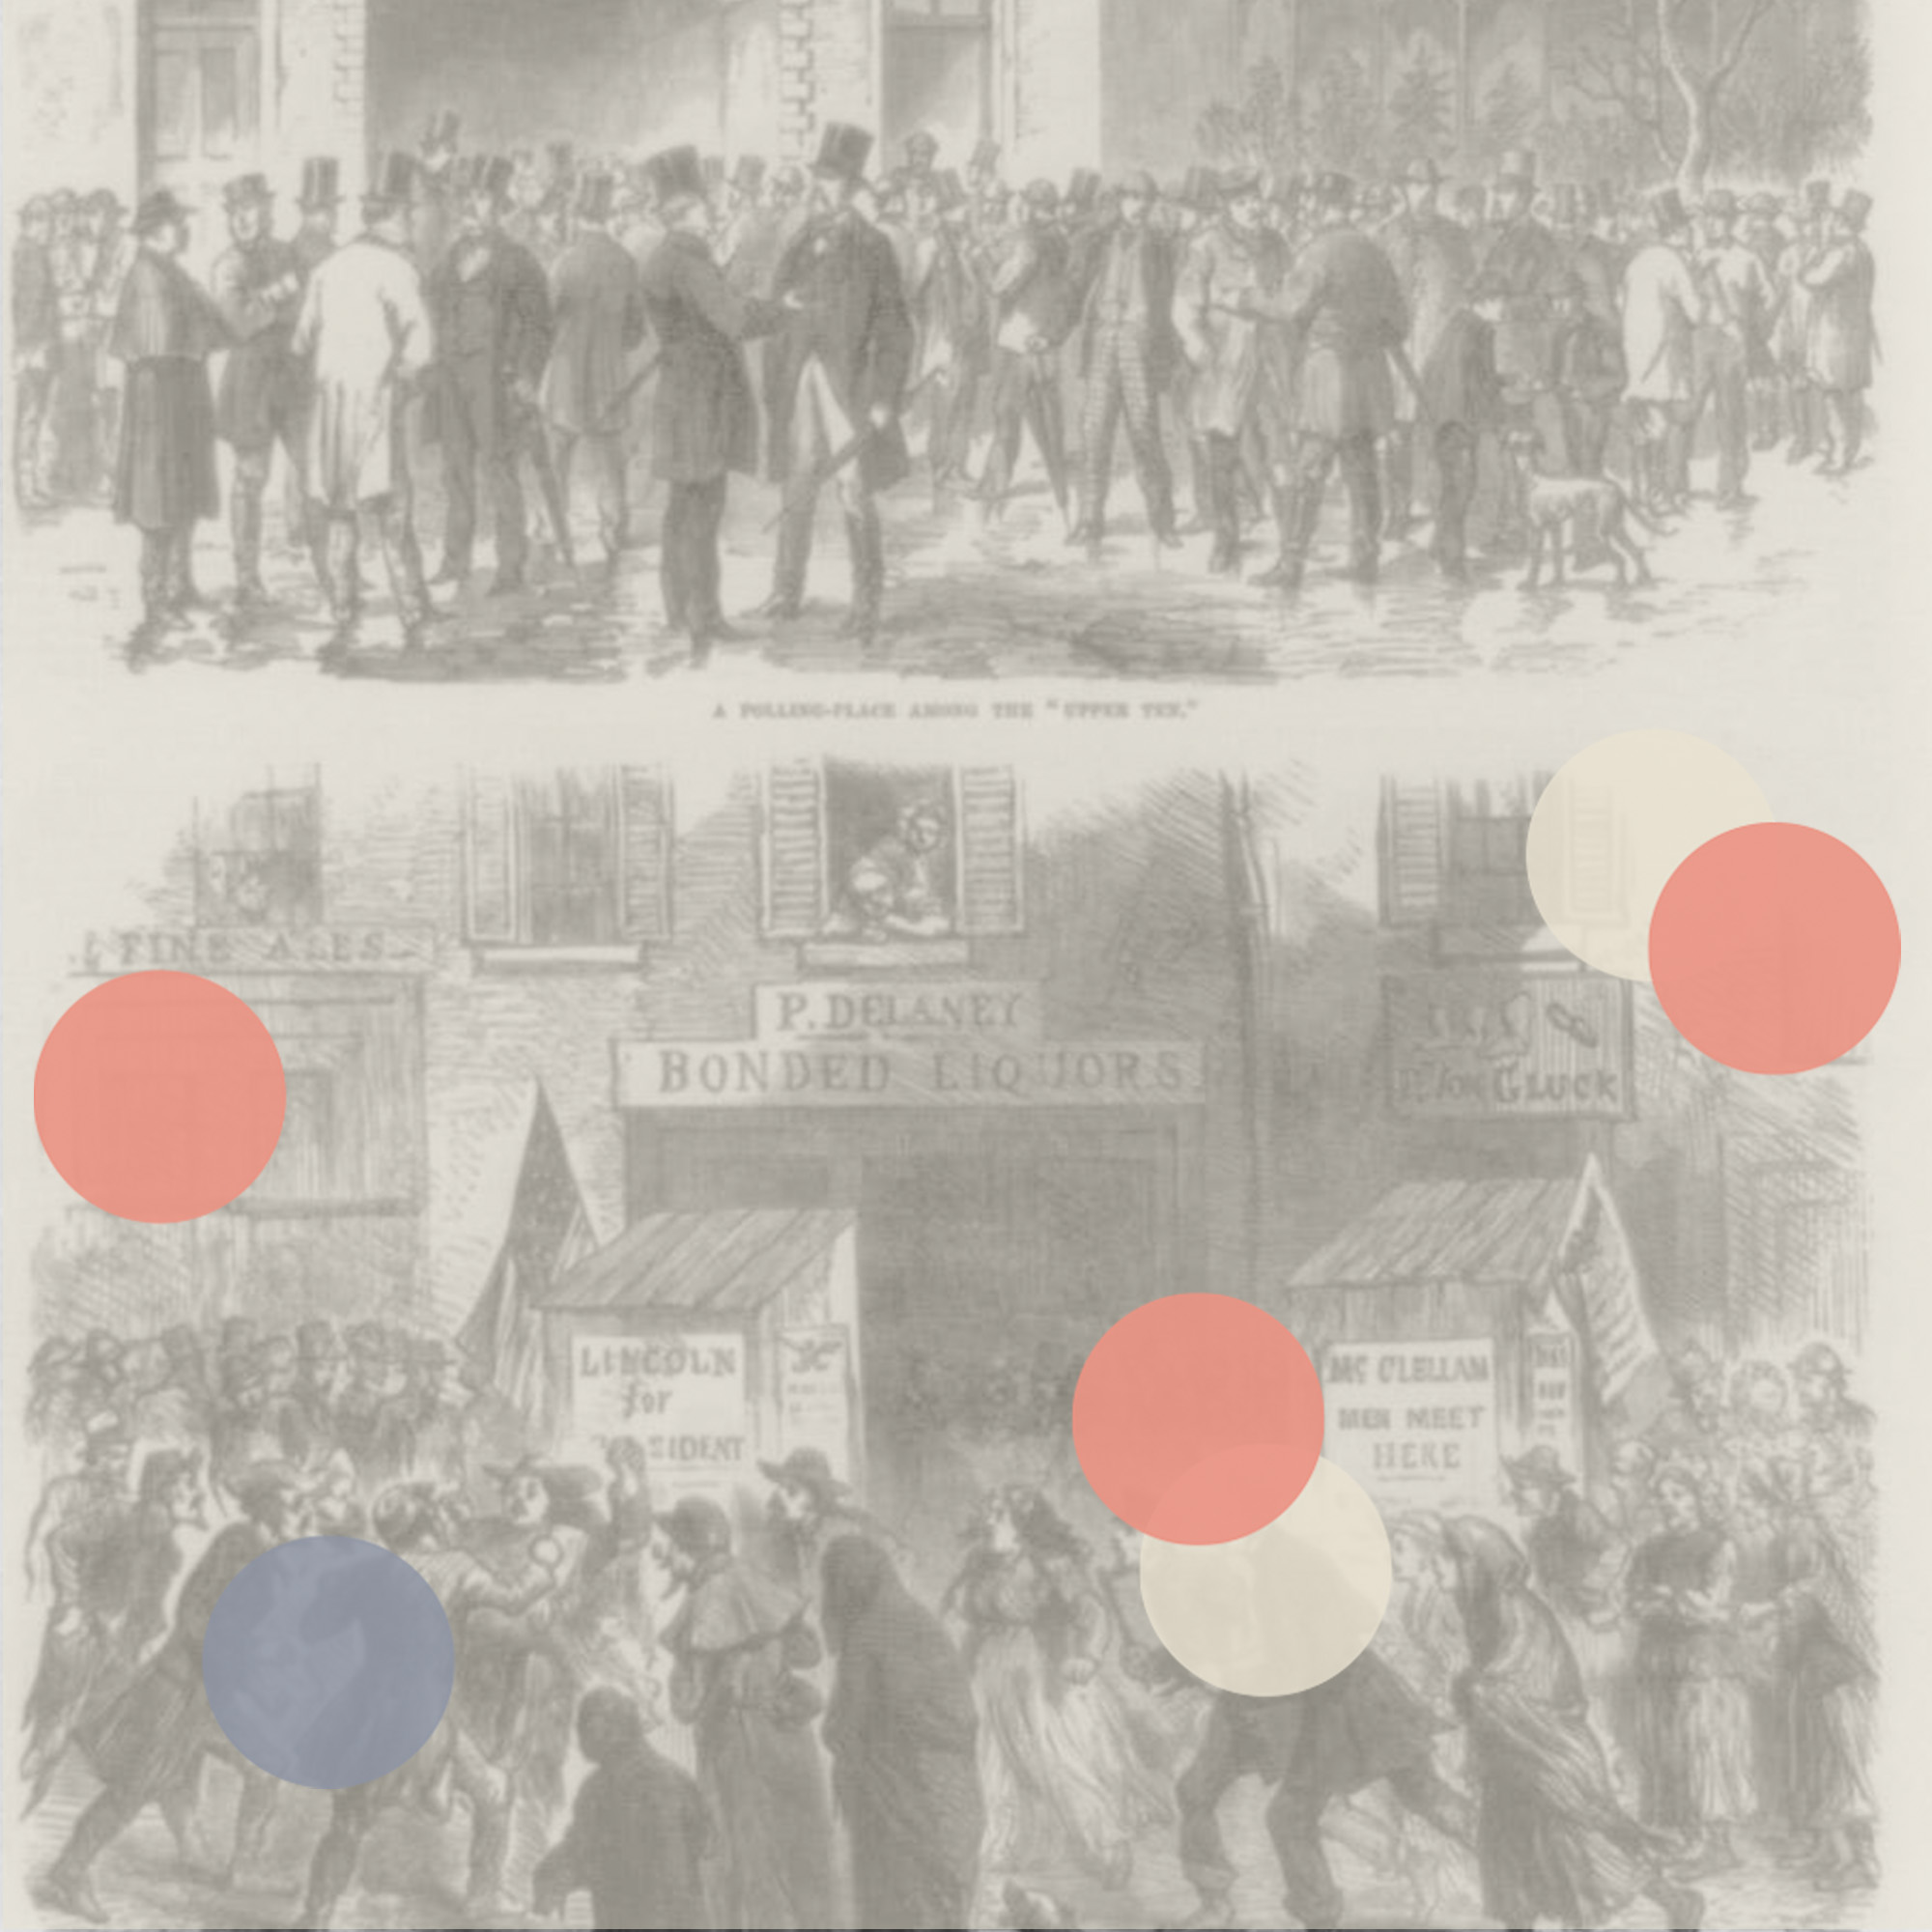 Why Do We Vote On Tuesday? (1845)